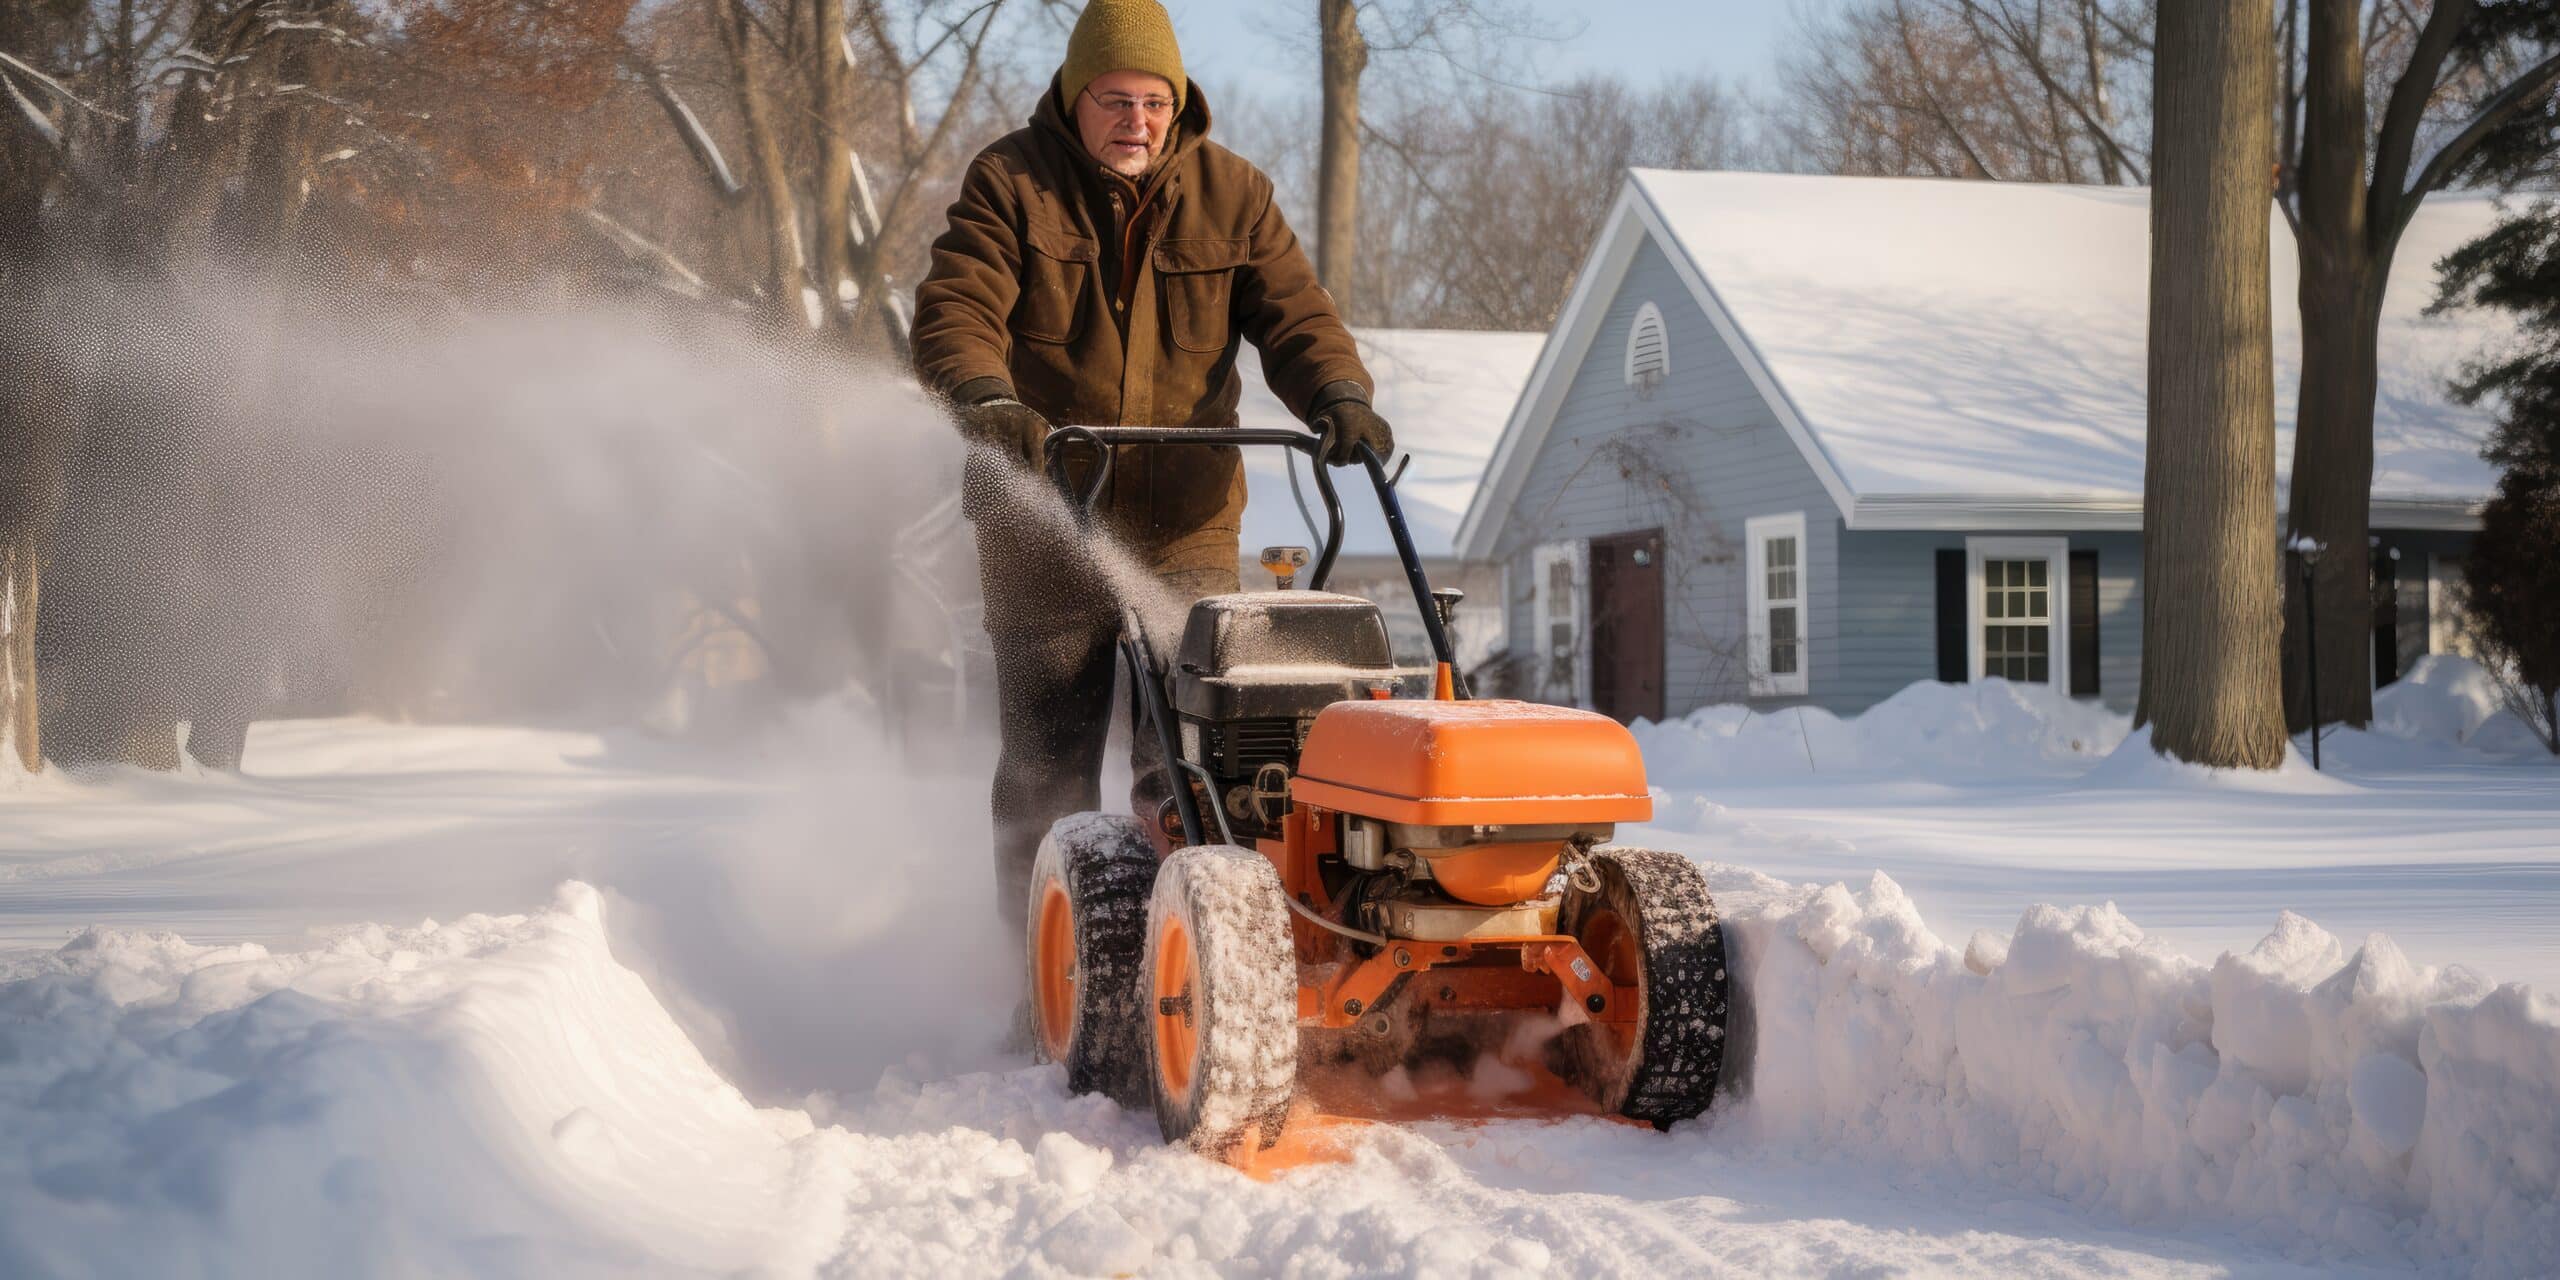 www.appr.com : Can electric snow blowers handle heavy snowfall well?